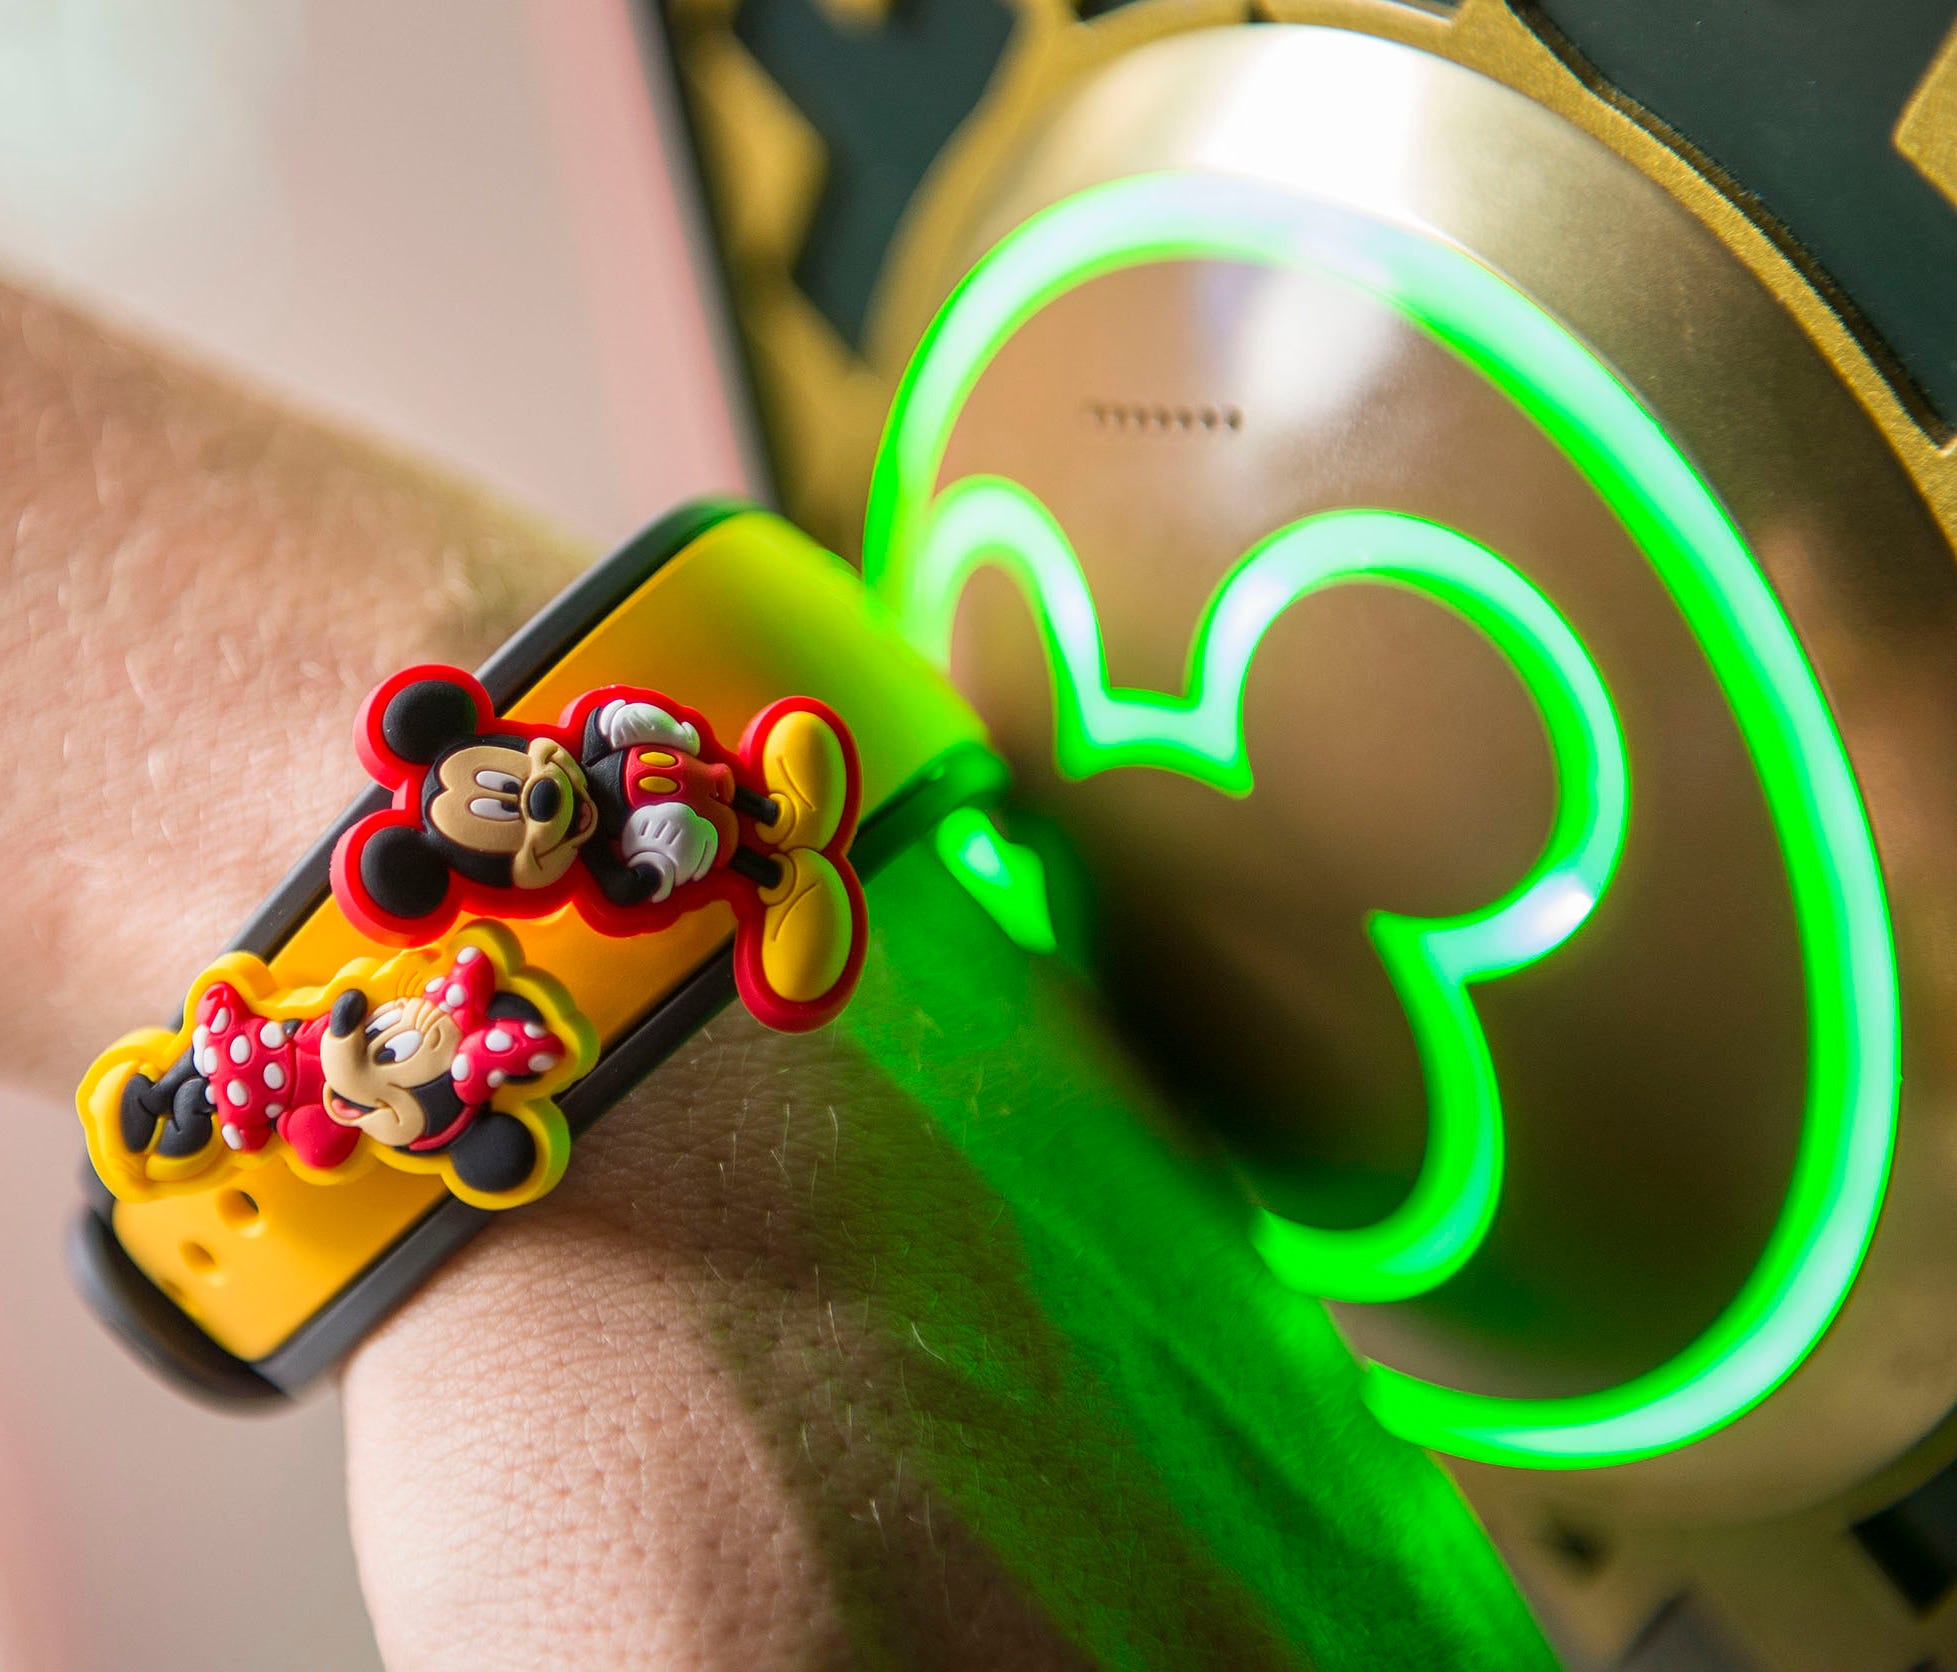 Walt Disney World Resort guests use MagicBands for FastPass+ access to experiences and attractions throughout the theme parks in Lake Buena Vista, Fla. Guests also can use MagicBands to enter their Disney Resort hotel room, buy food and merchandise, 